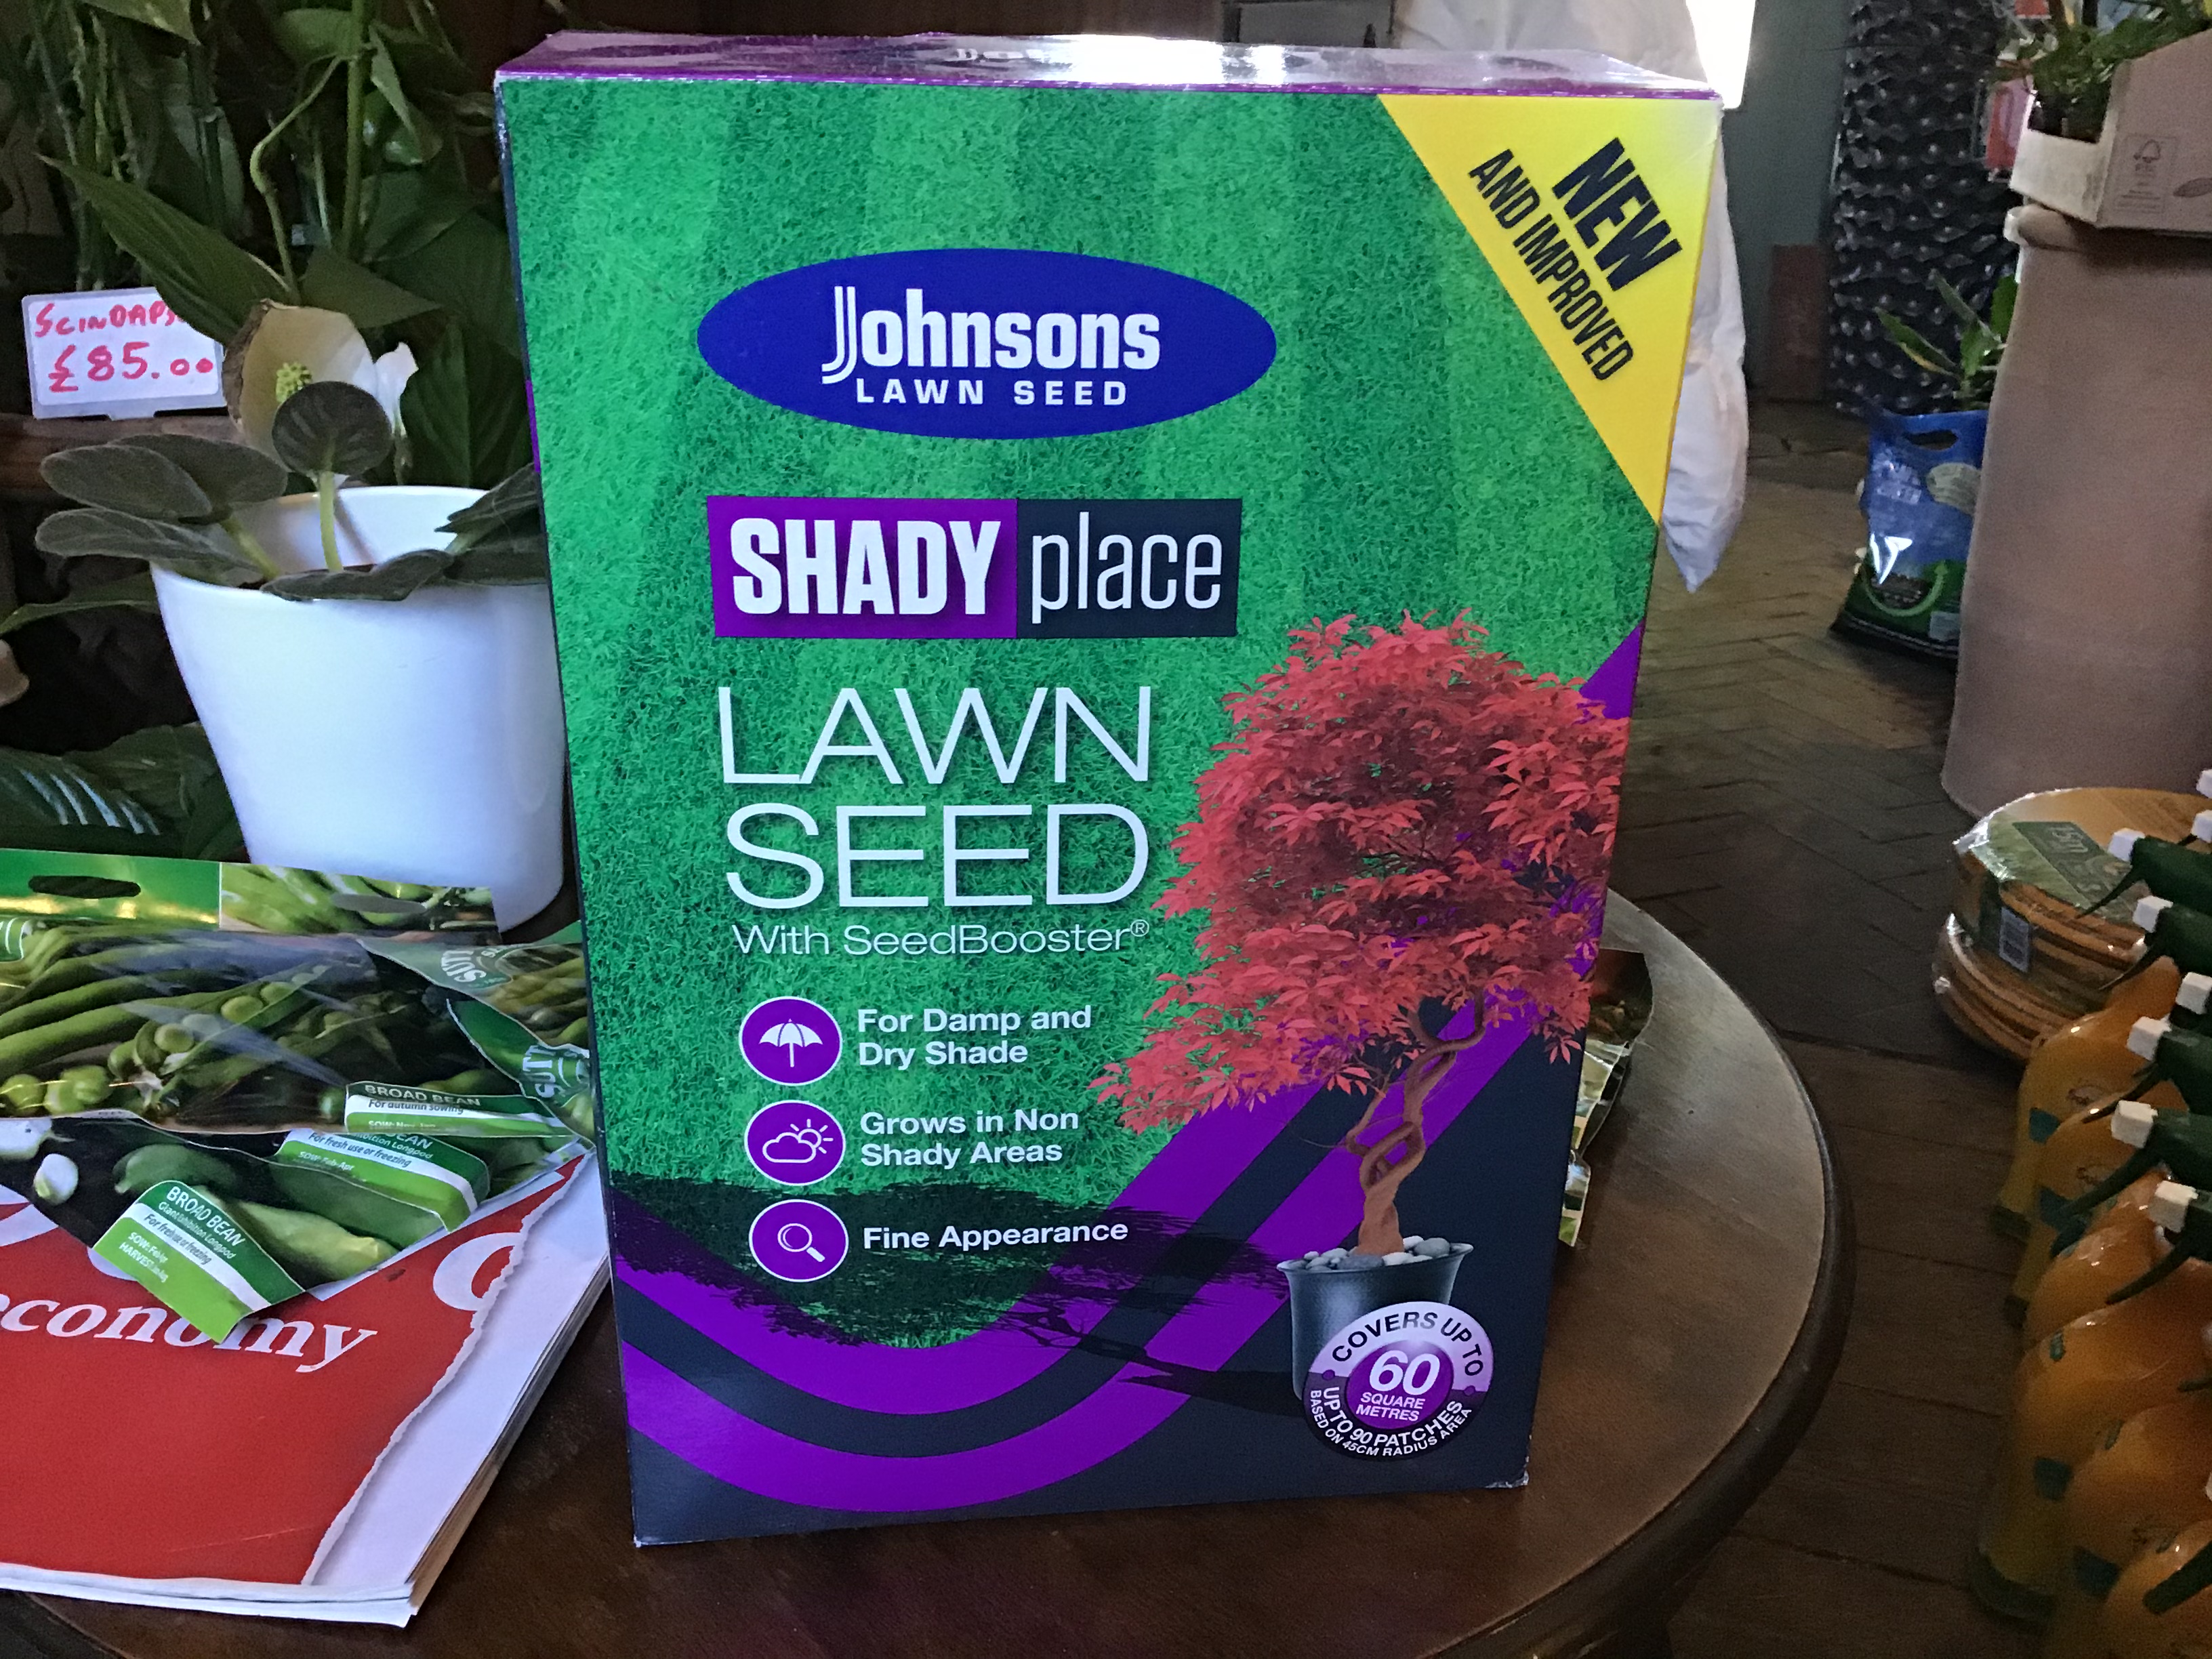 Lawn Seed Johnson’s shady place 1.5kg for 60 sq m. Kew Gardener